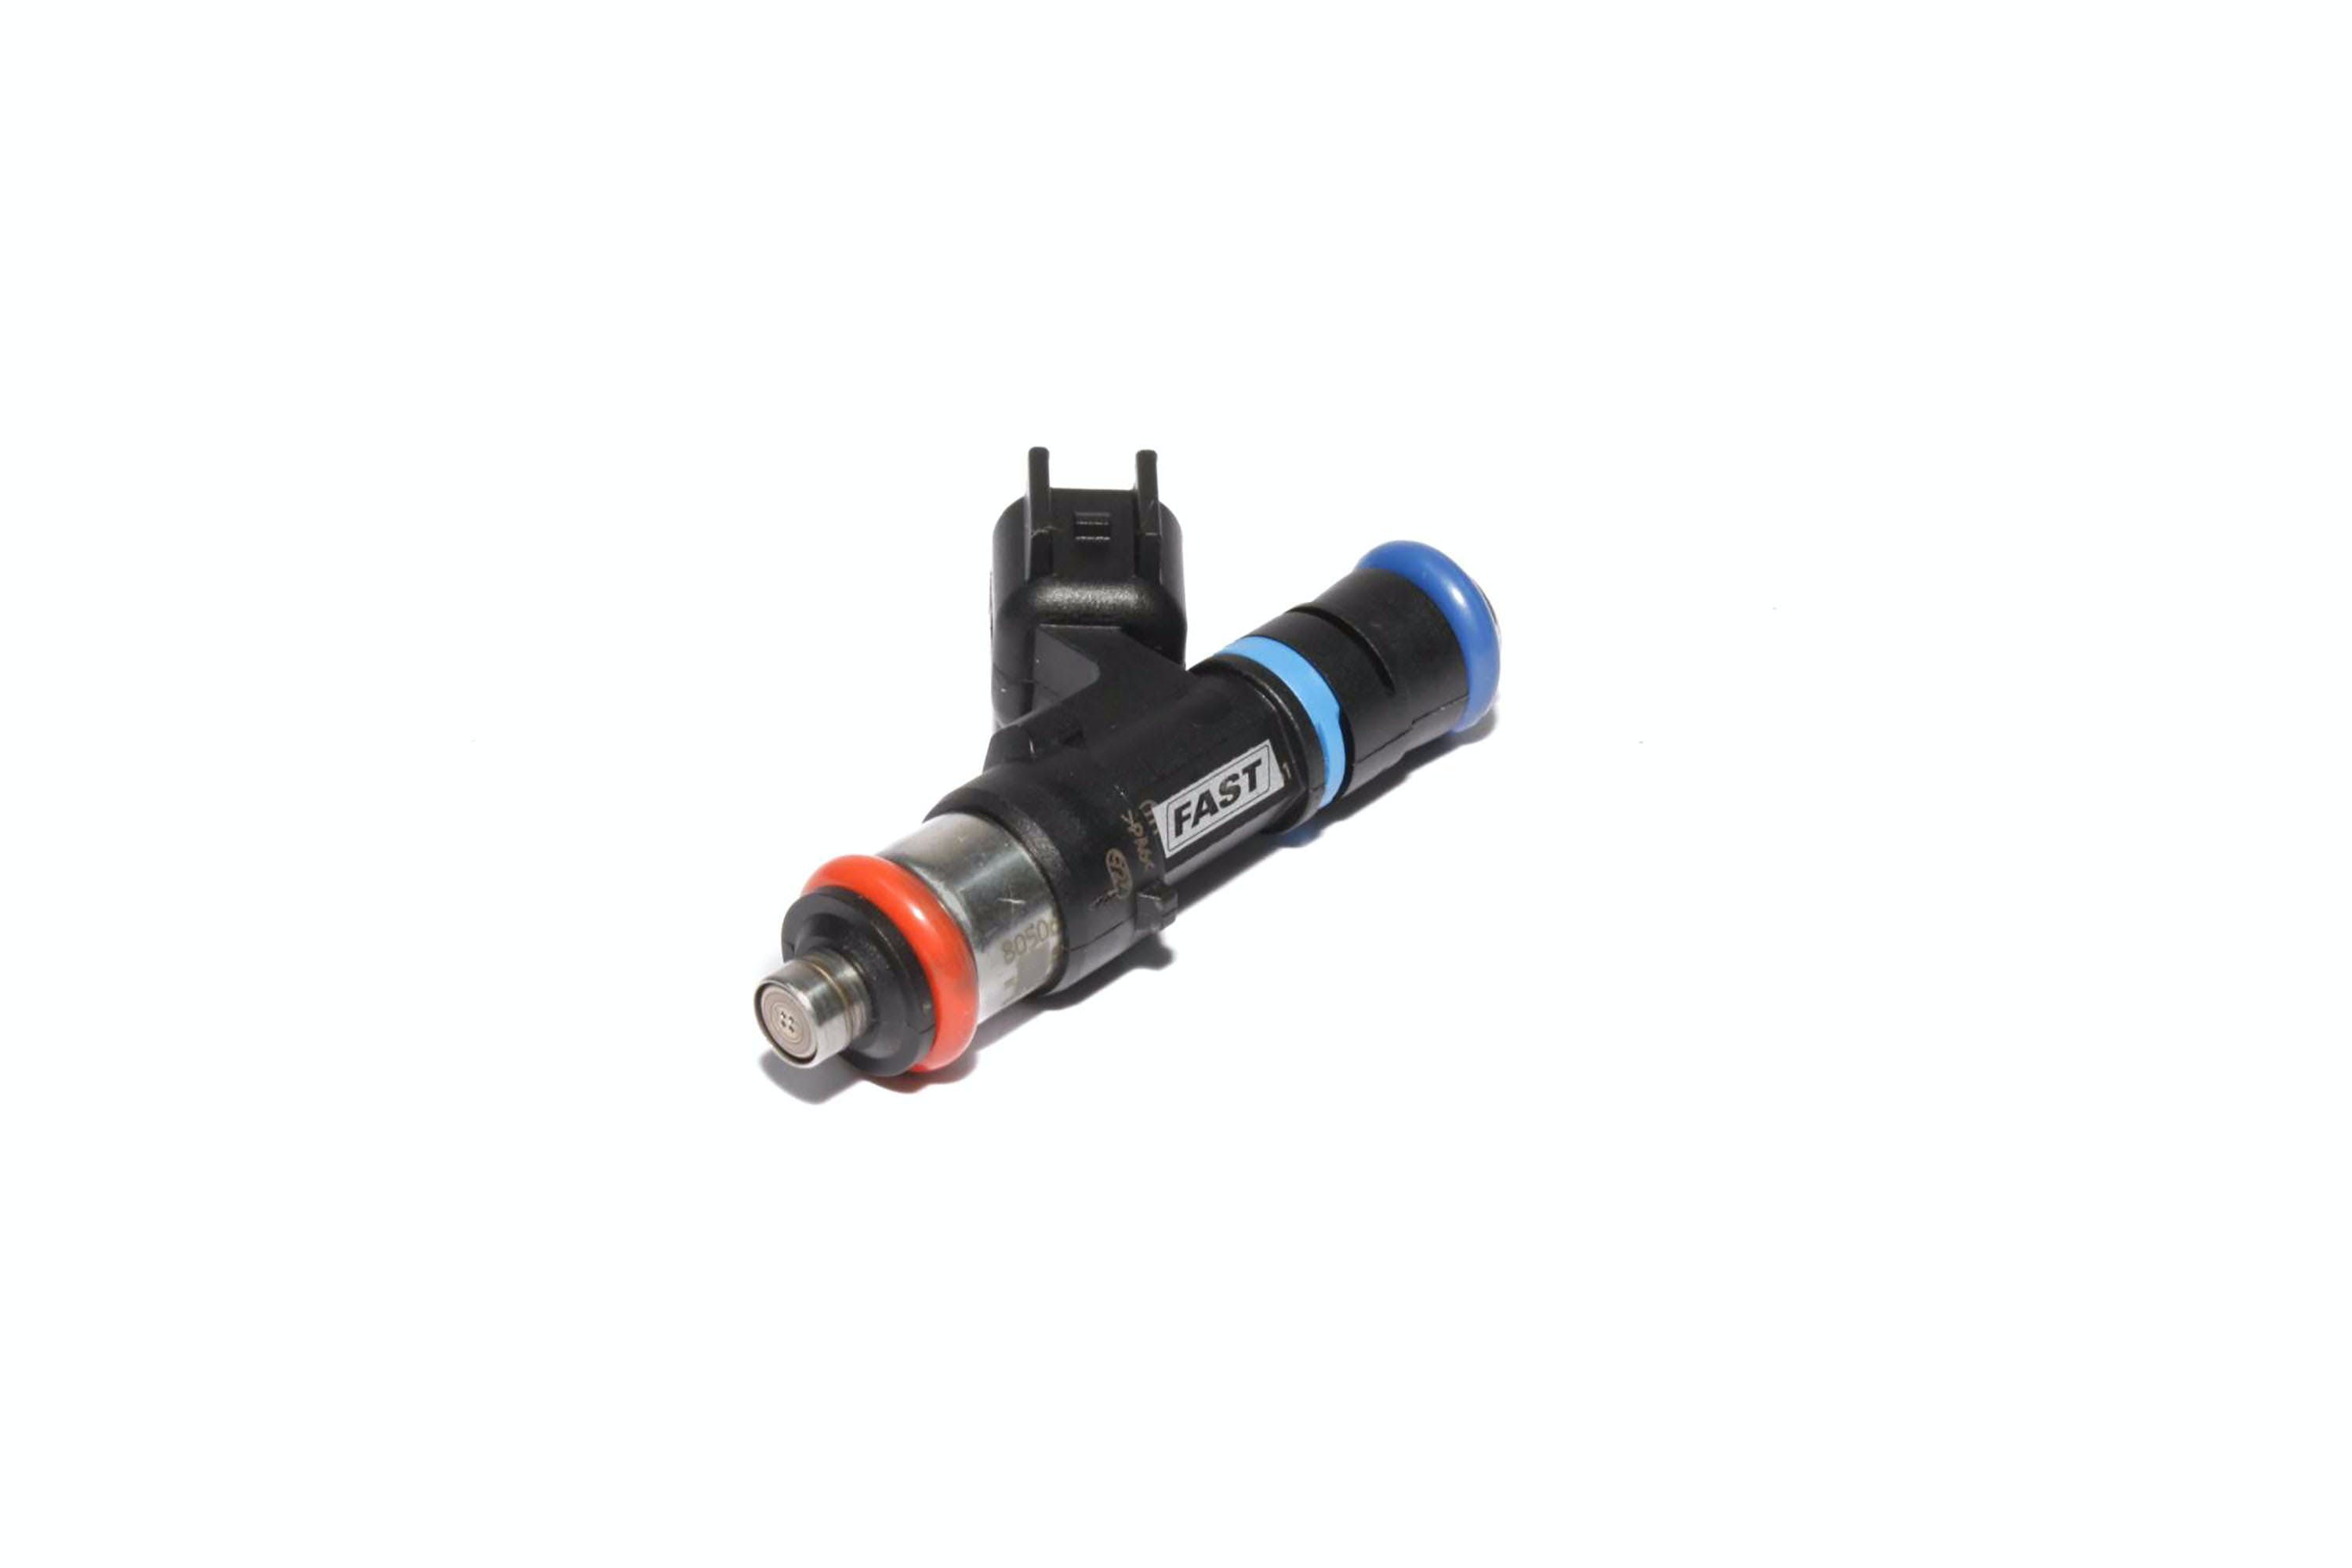 FAST - Fuel Air Spark Technology 30572-1 LS2 Type 57 Lb/Hr High Impedance Injector